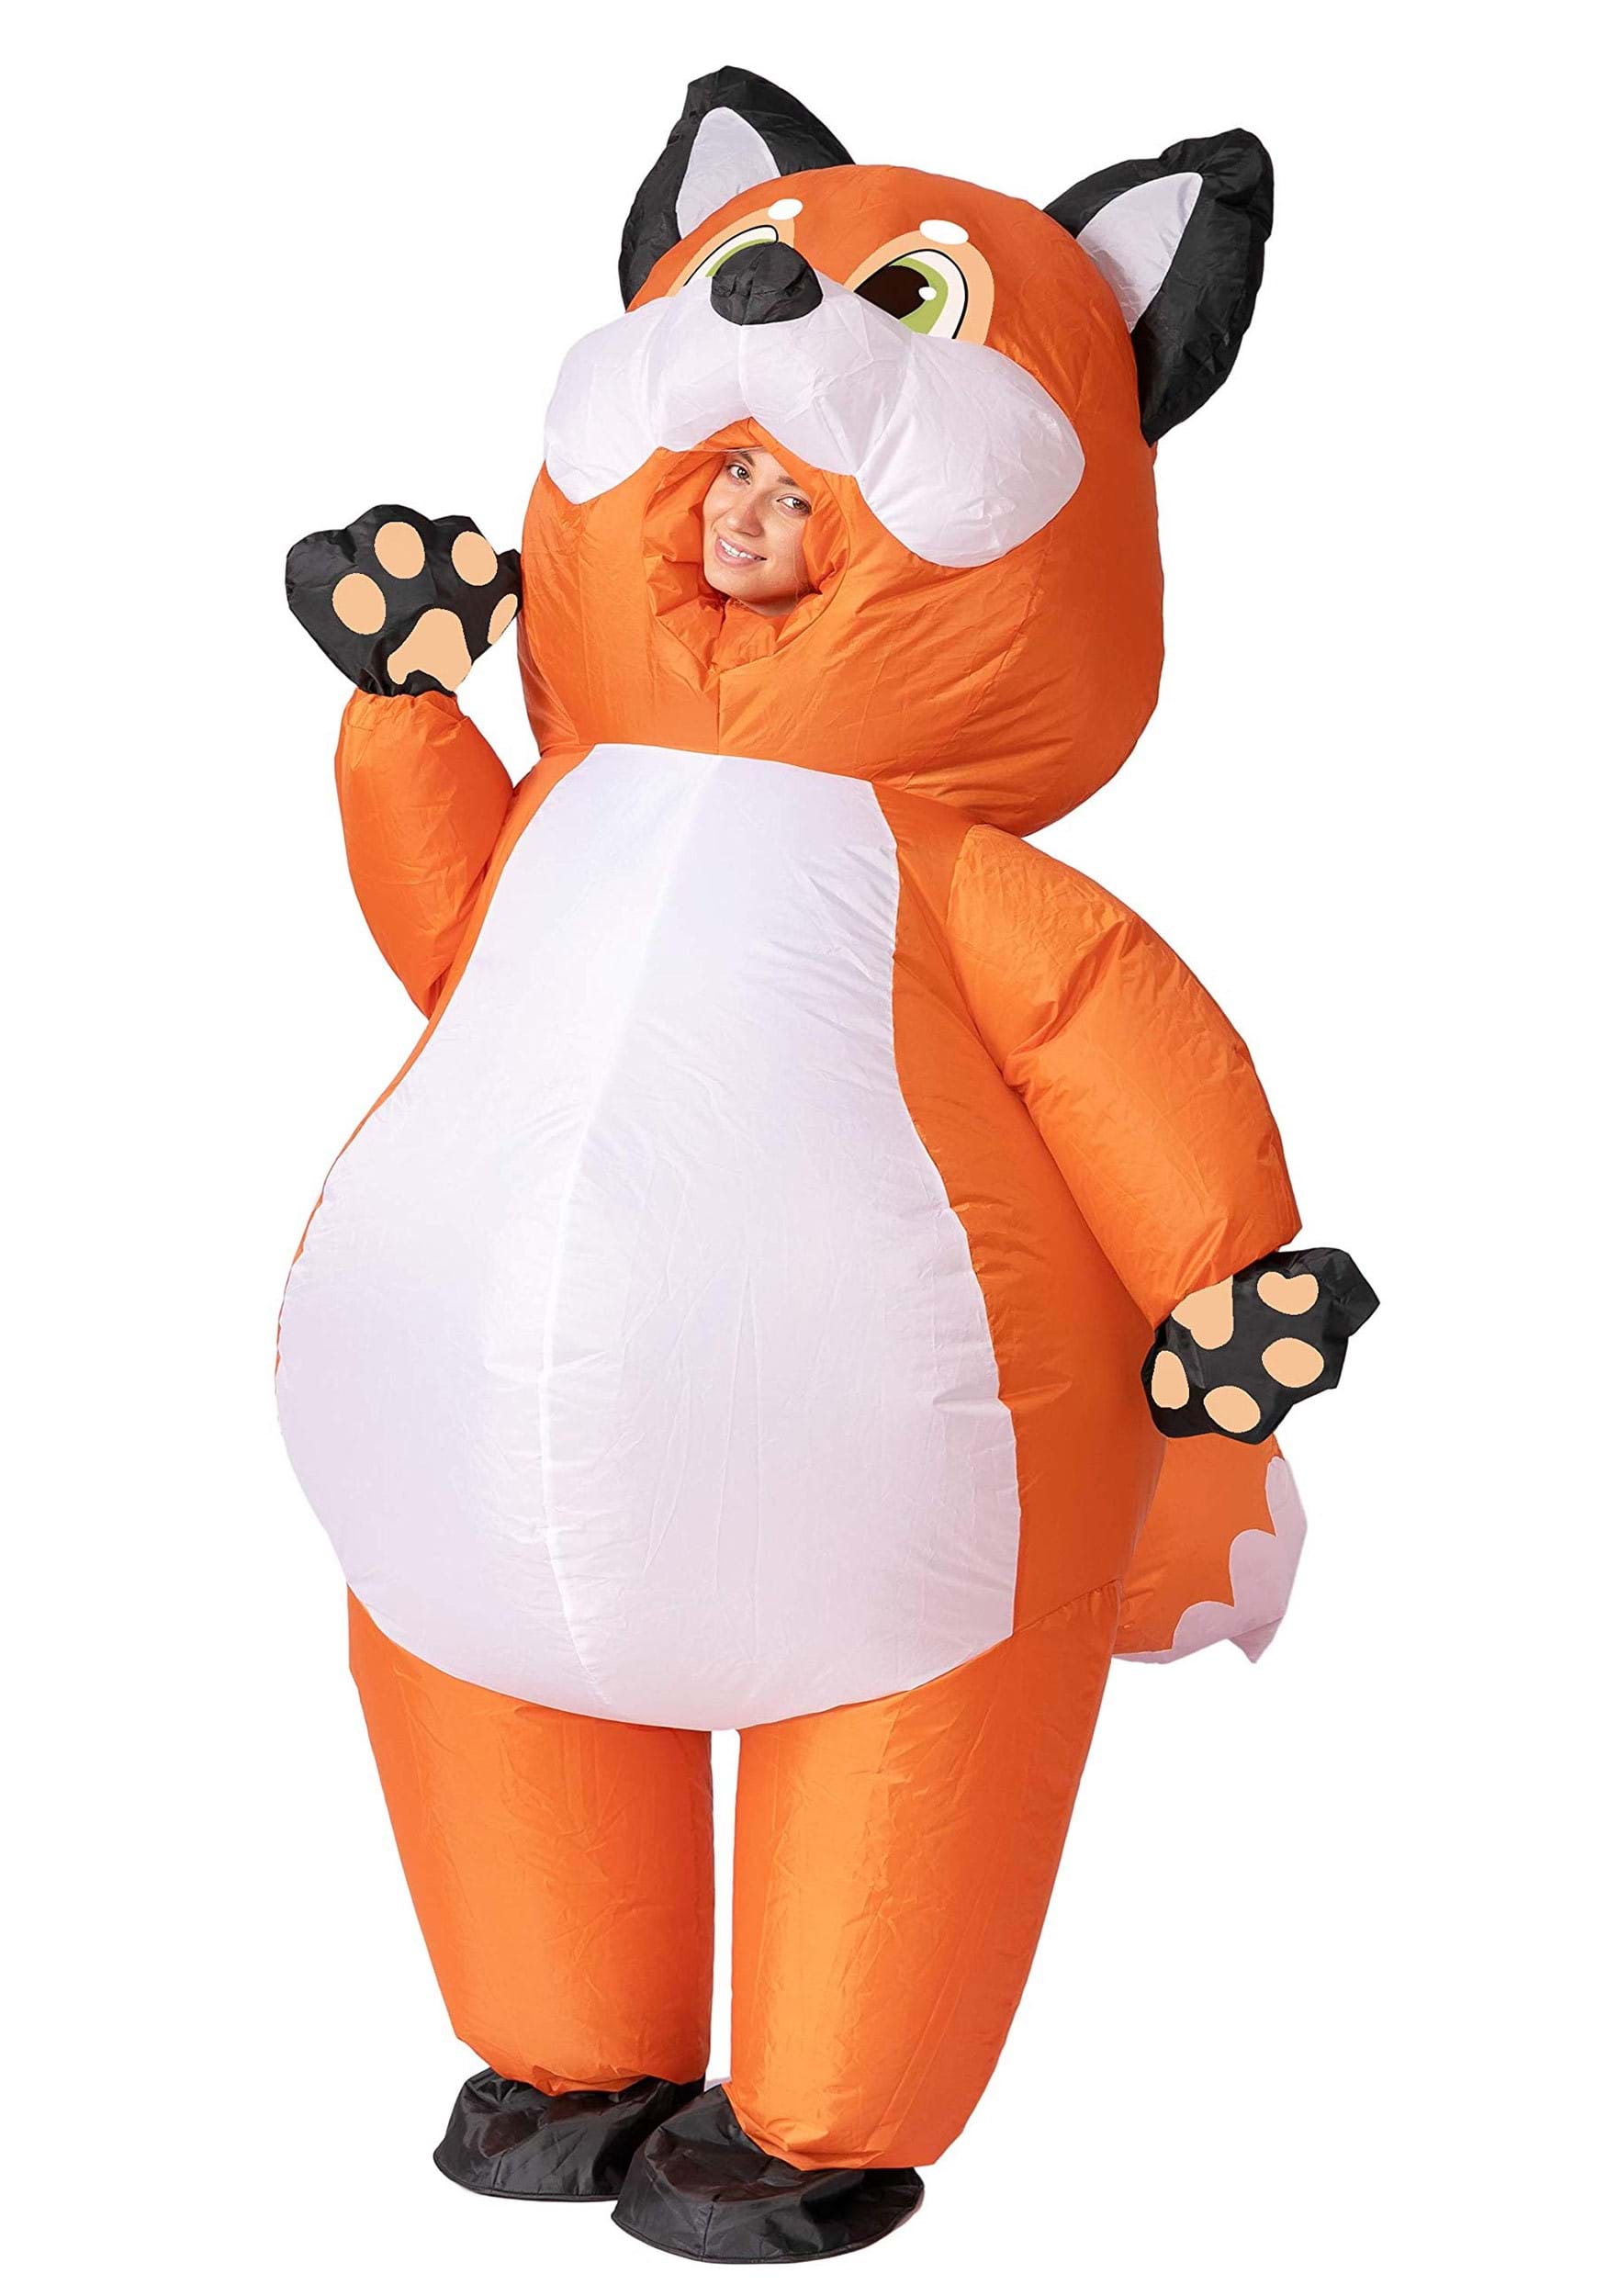 Adult 's Inflatable Fox Fancy Dress Costume , Animal Fancy Dress Costumes